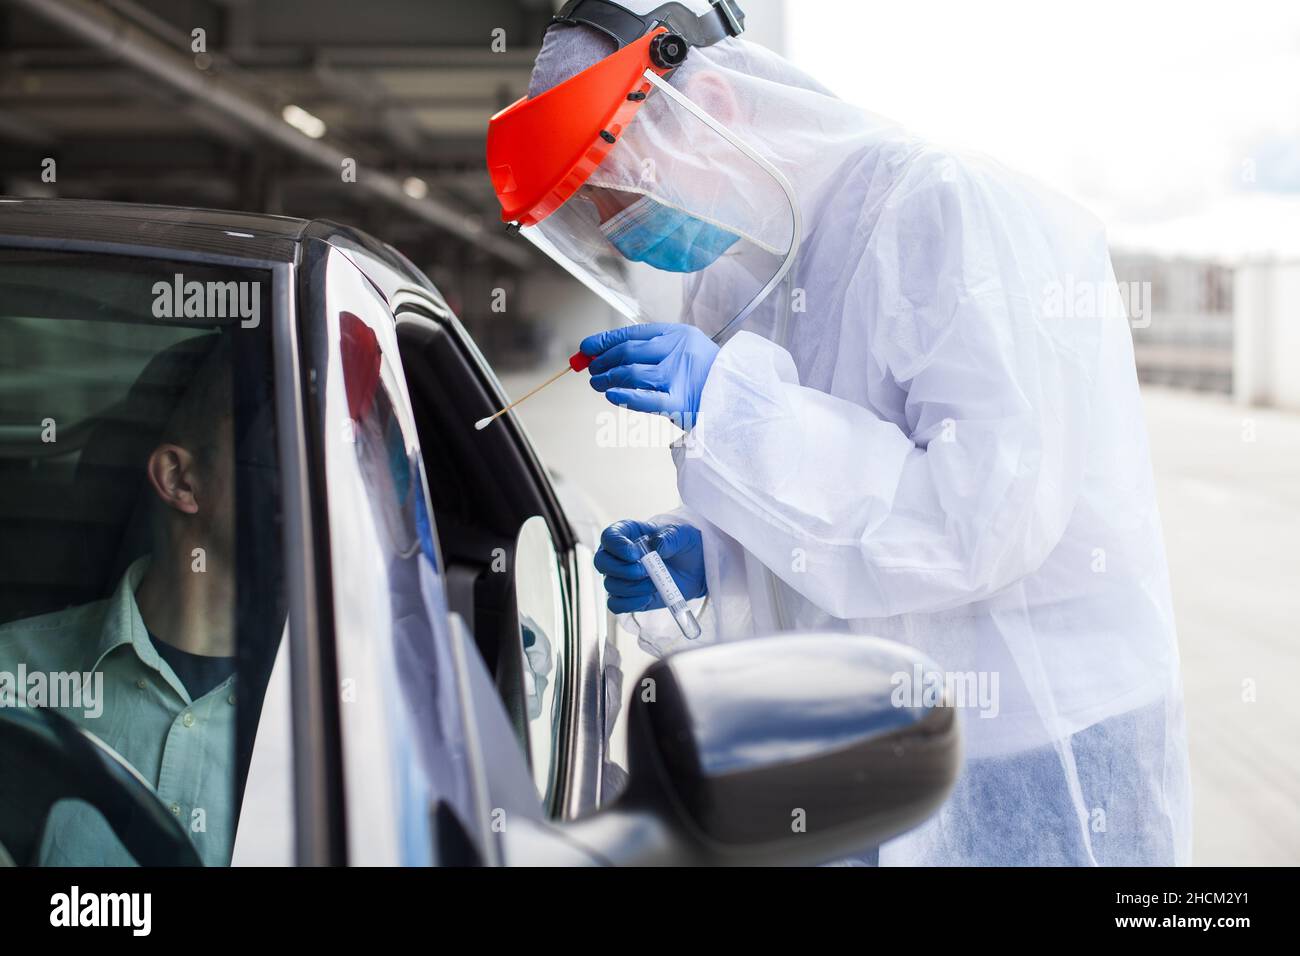 Medical healthcare worker dressed in white full protective gear,wearing face mask,protective gloves and face shield,healthcare technician collecting Stock Photo